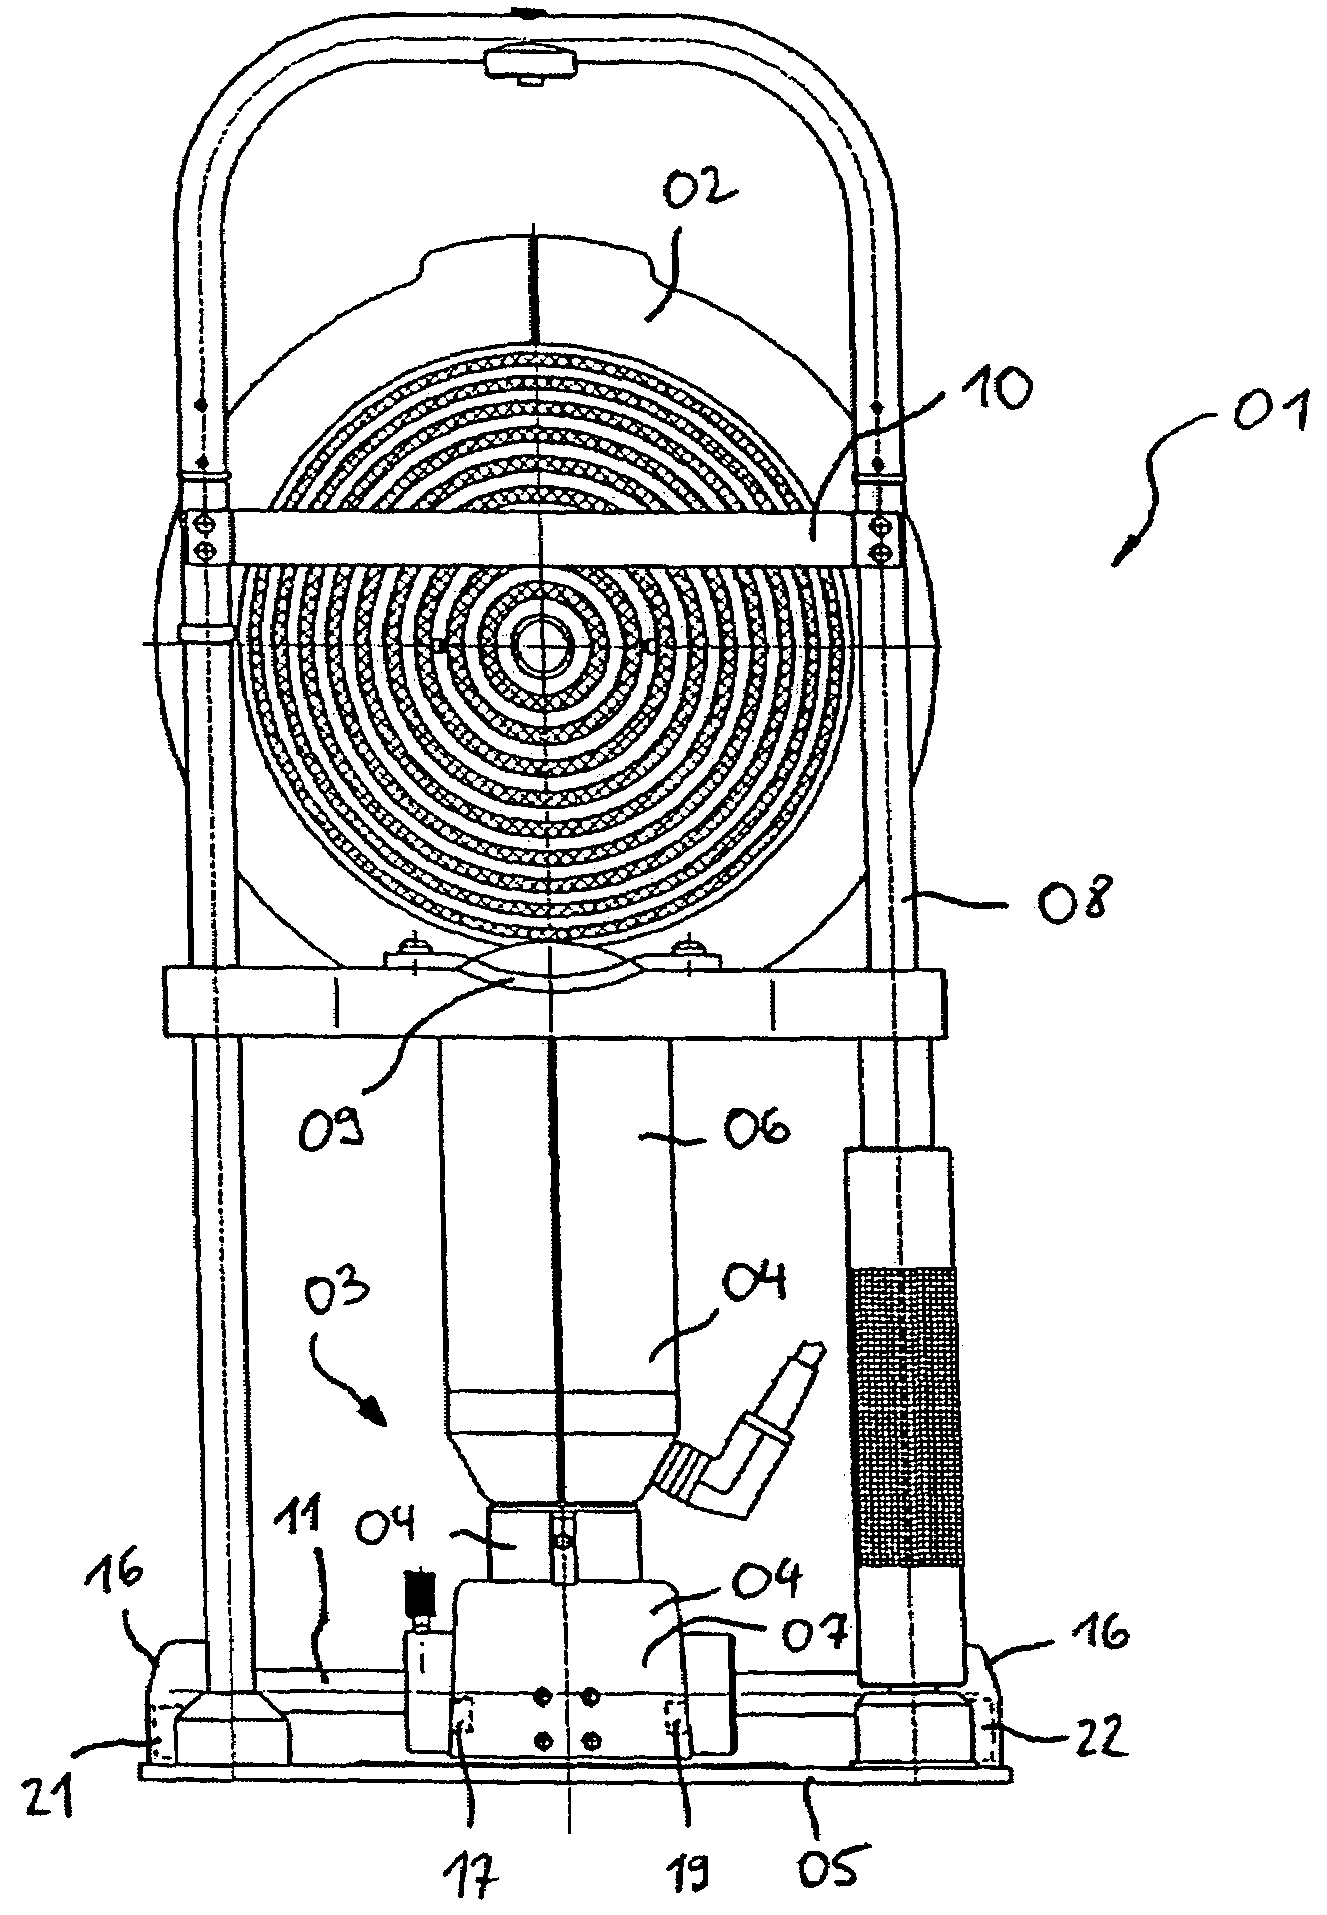 Device for carrying out examinations of the human eye